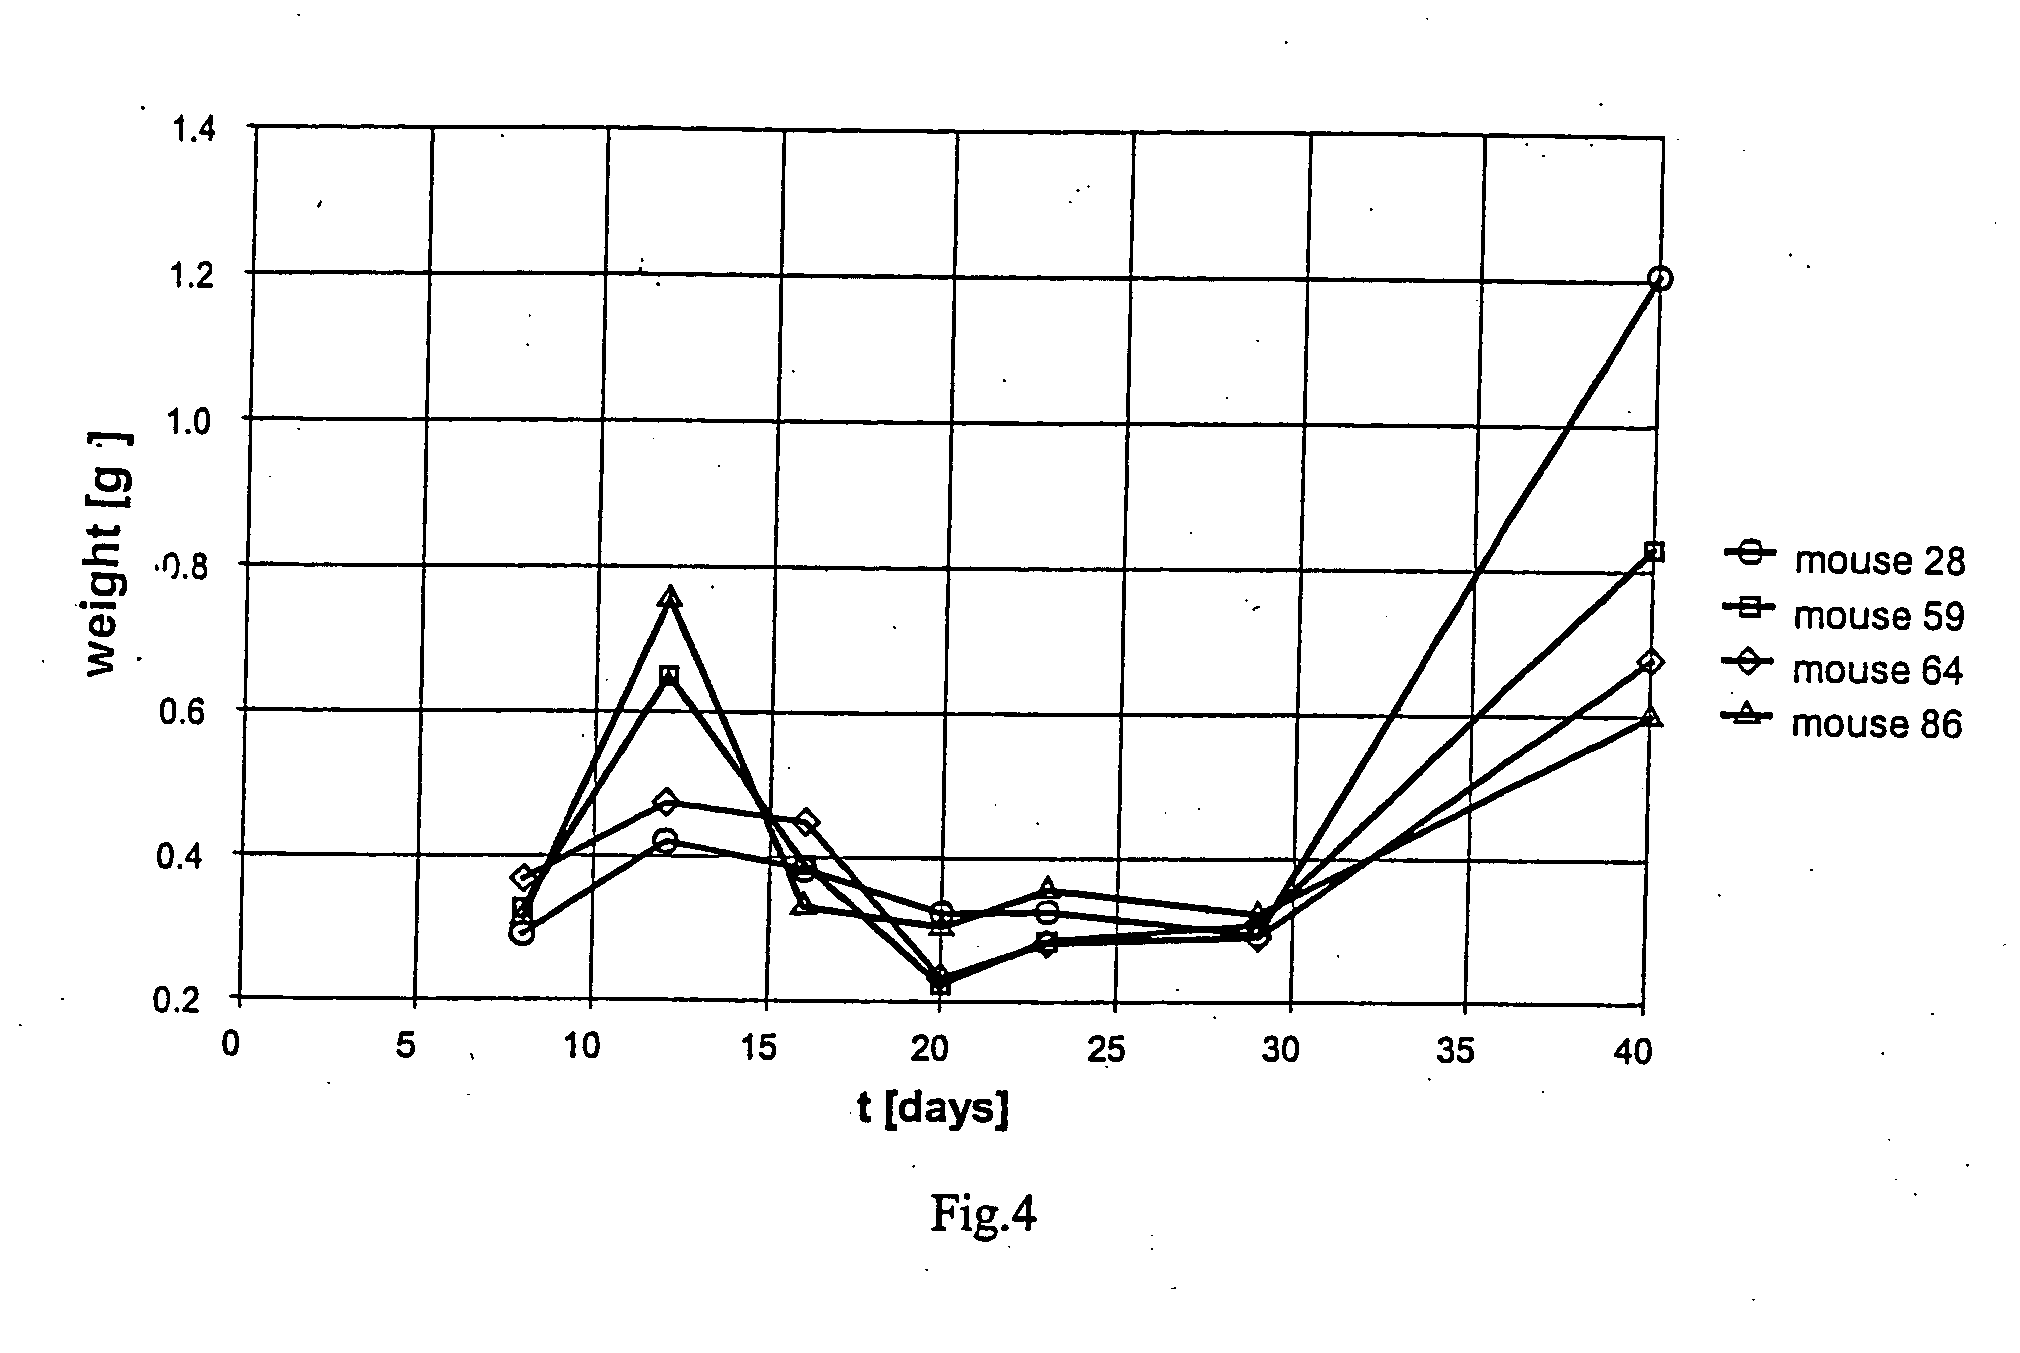 Method for estimating or predicting the anti-tumor activity of a compound and for estimating or predicting the tumor growth in mammals